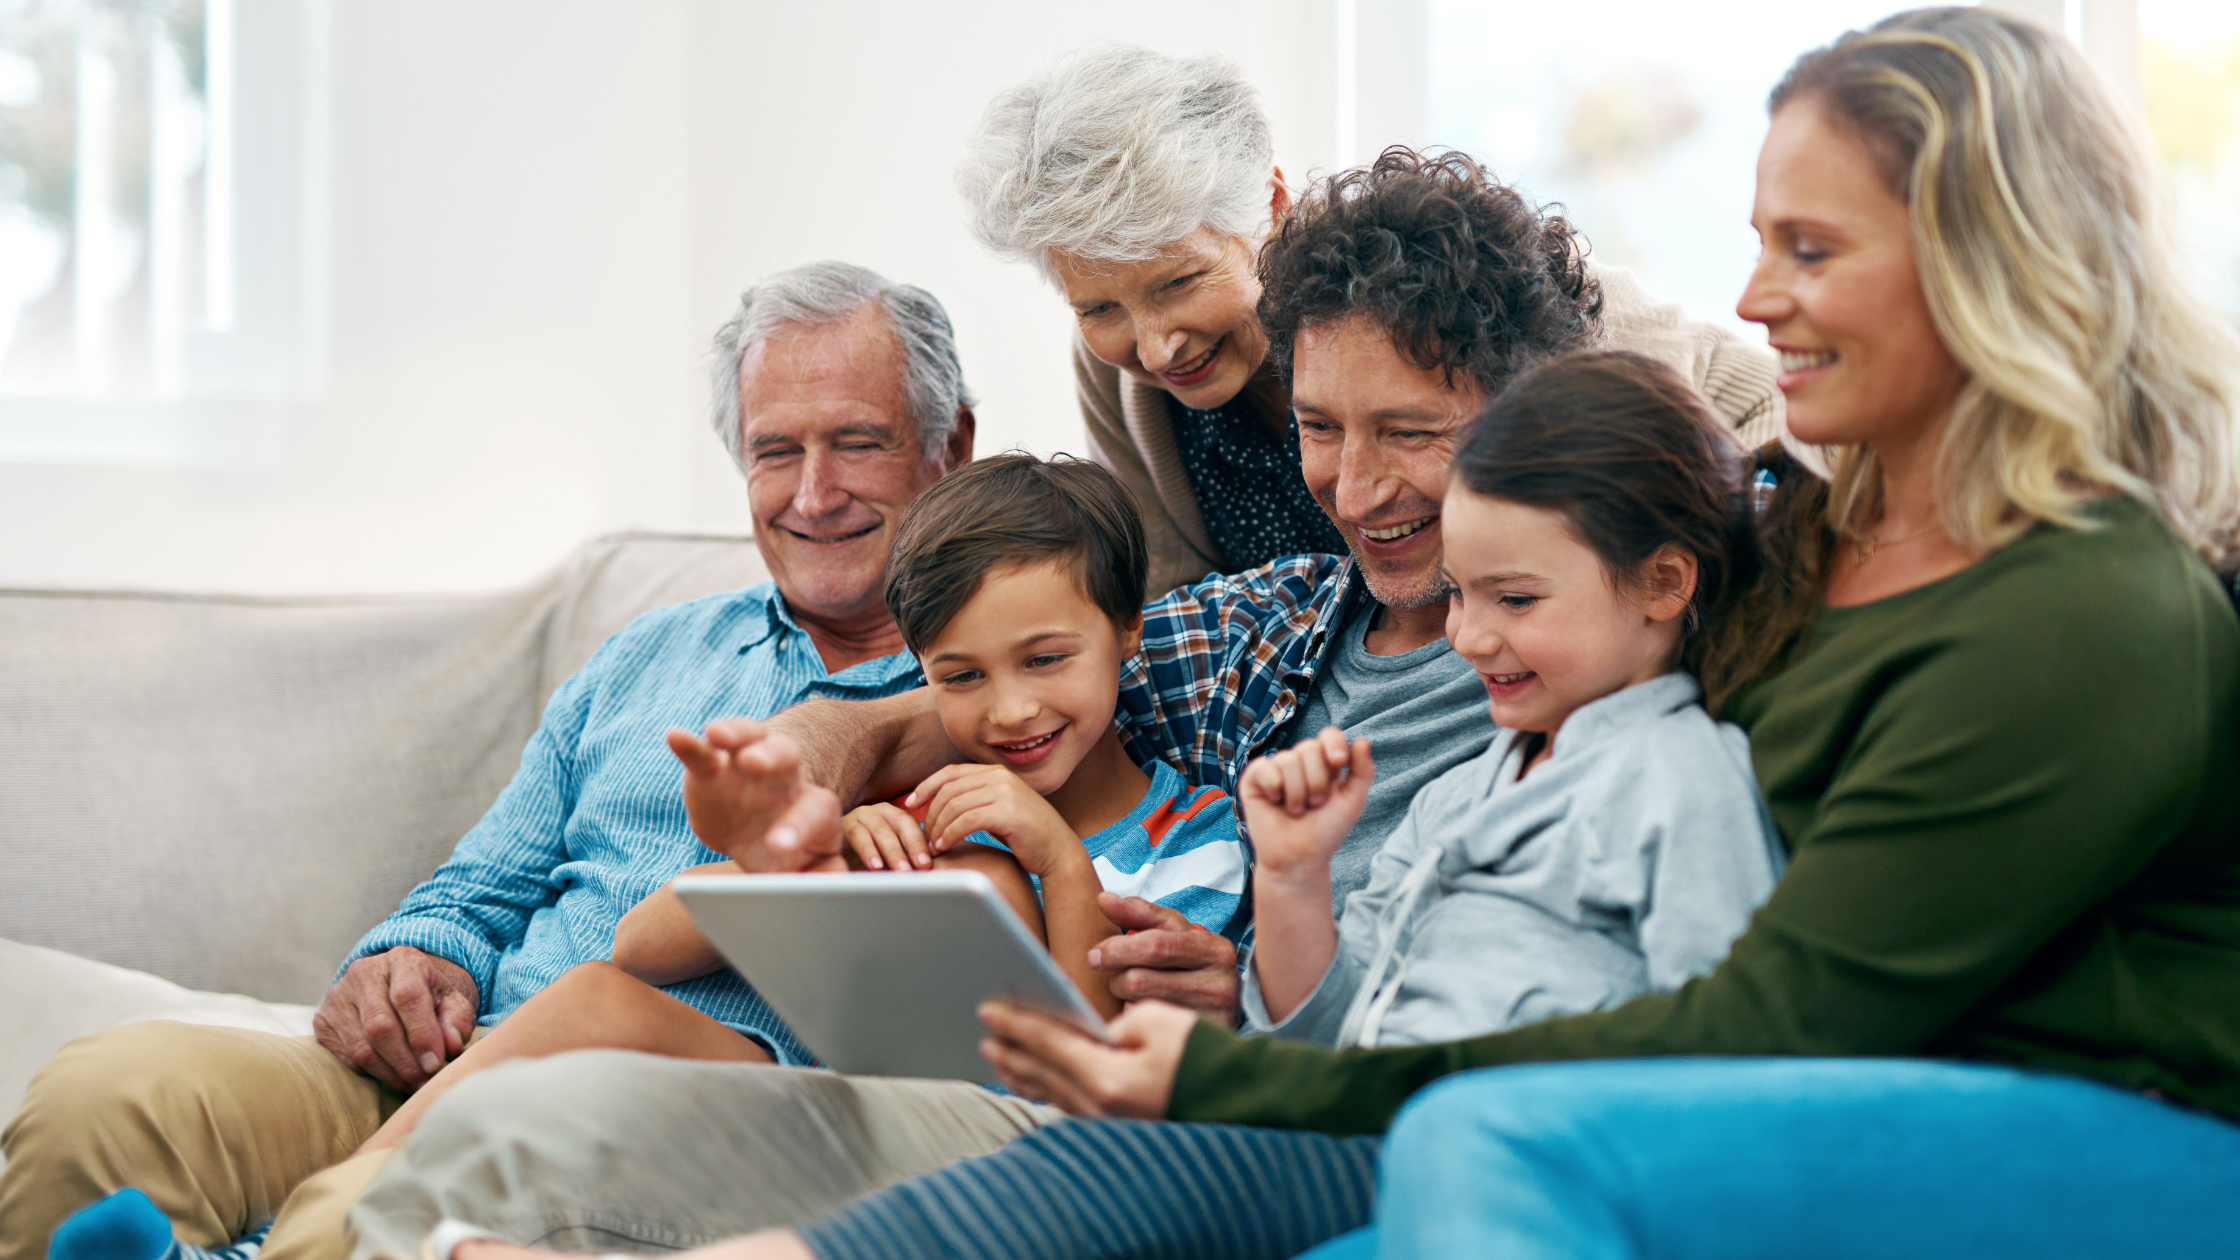 multi-generational family sitting on a couch looking at a tablet together